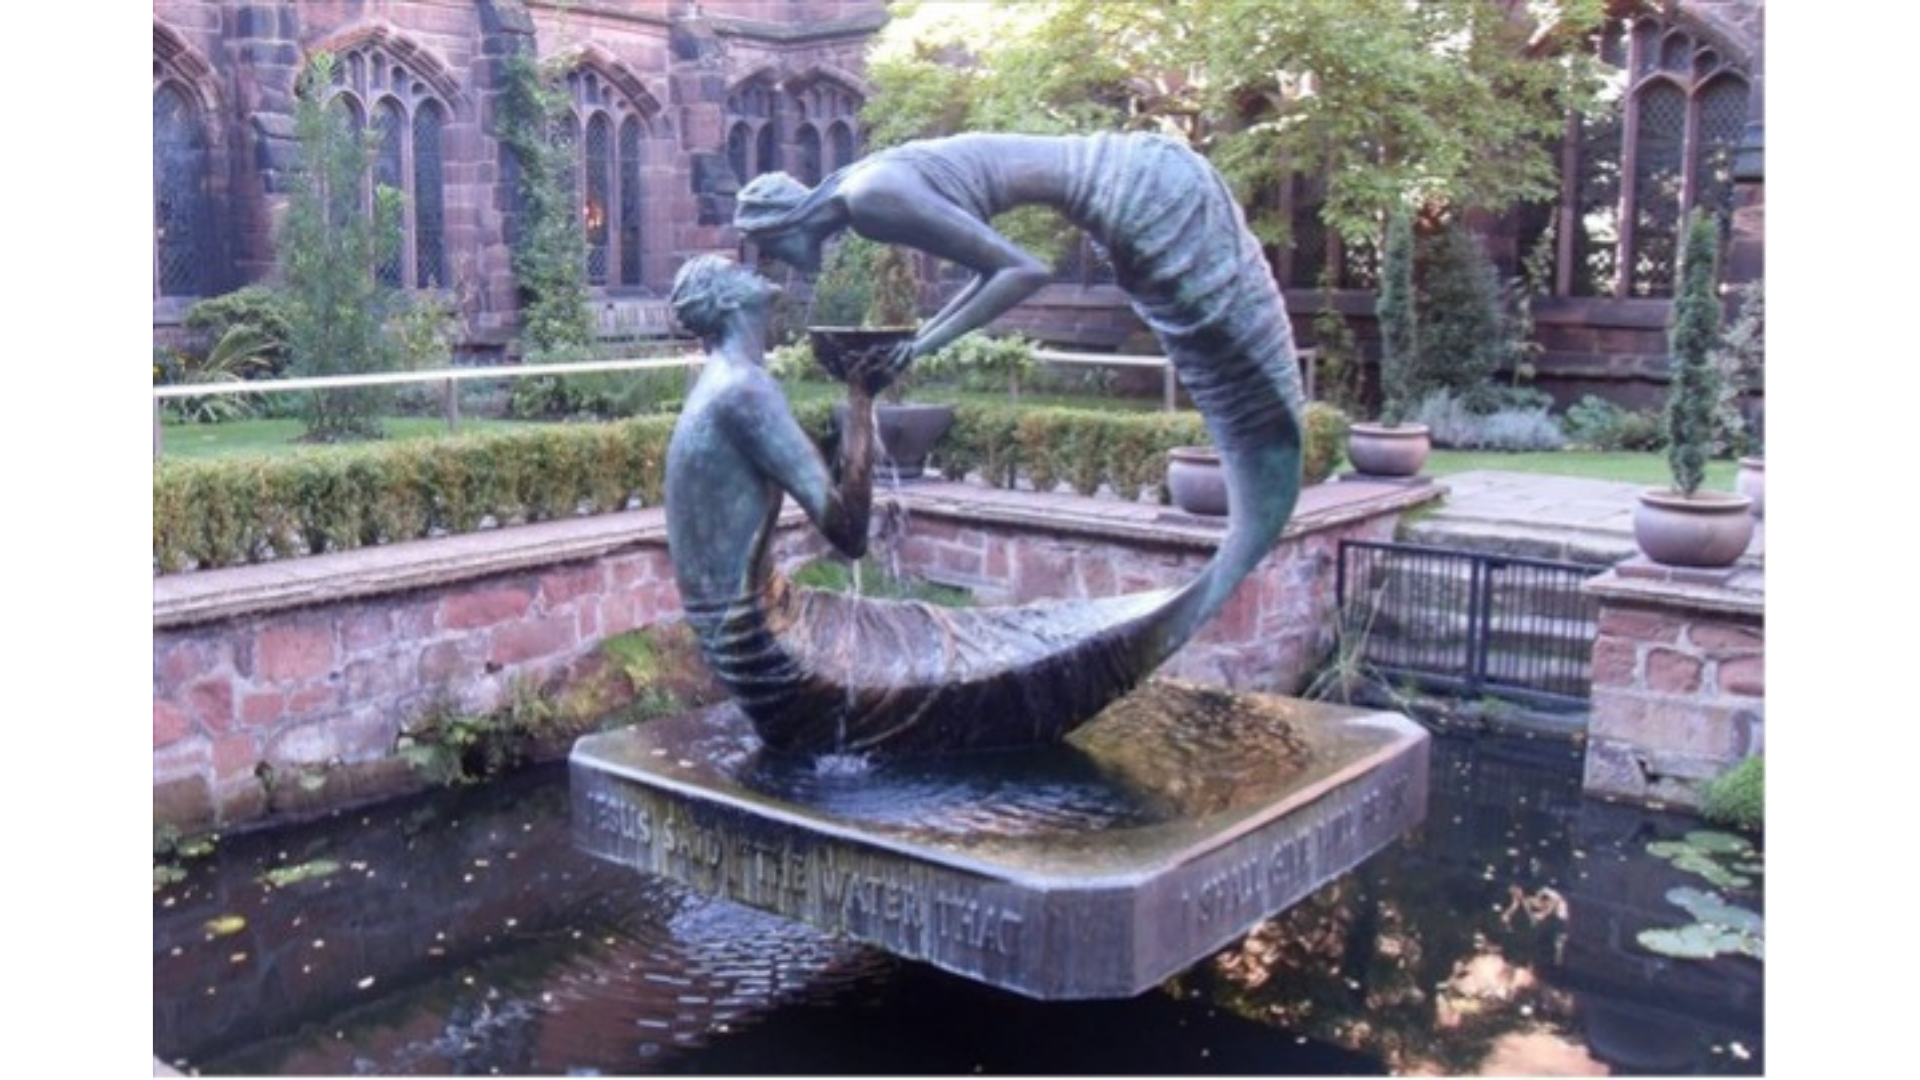 The 'Water of Life' statue at Chester Cathedral